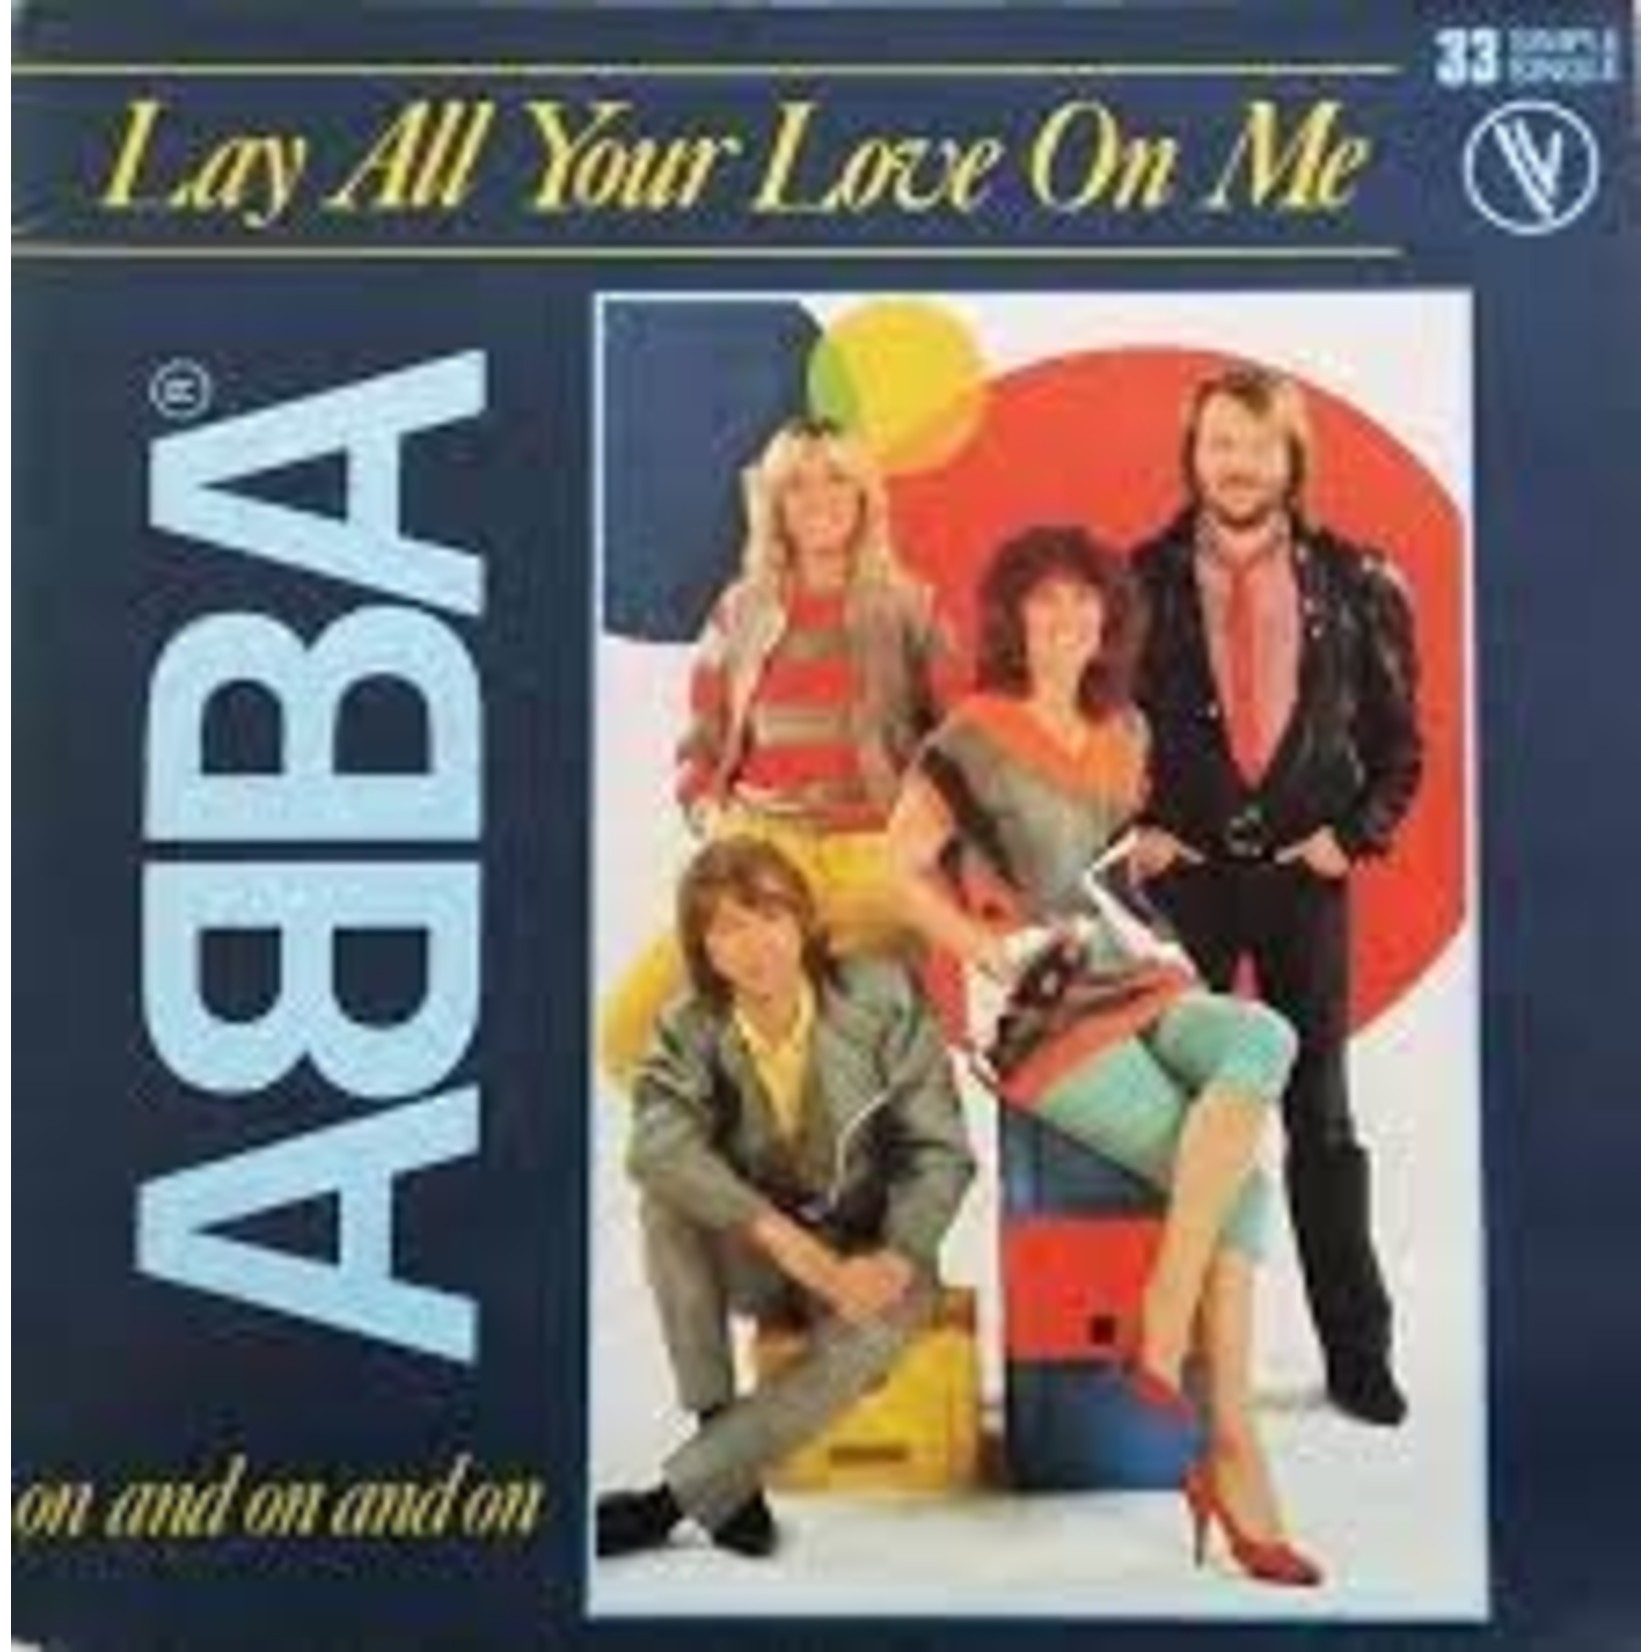 ABBA - lay your love on me.. 12"ep